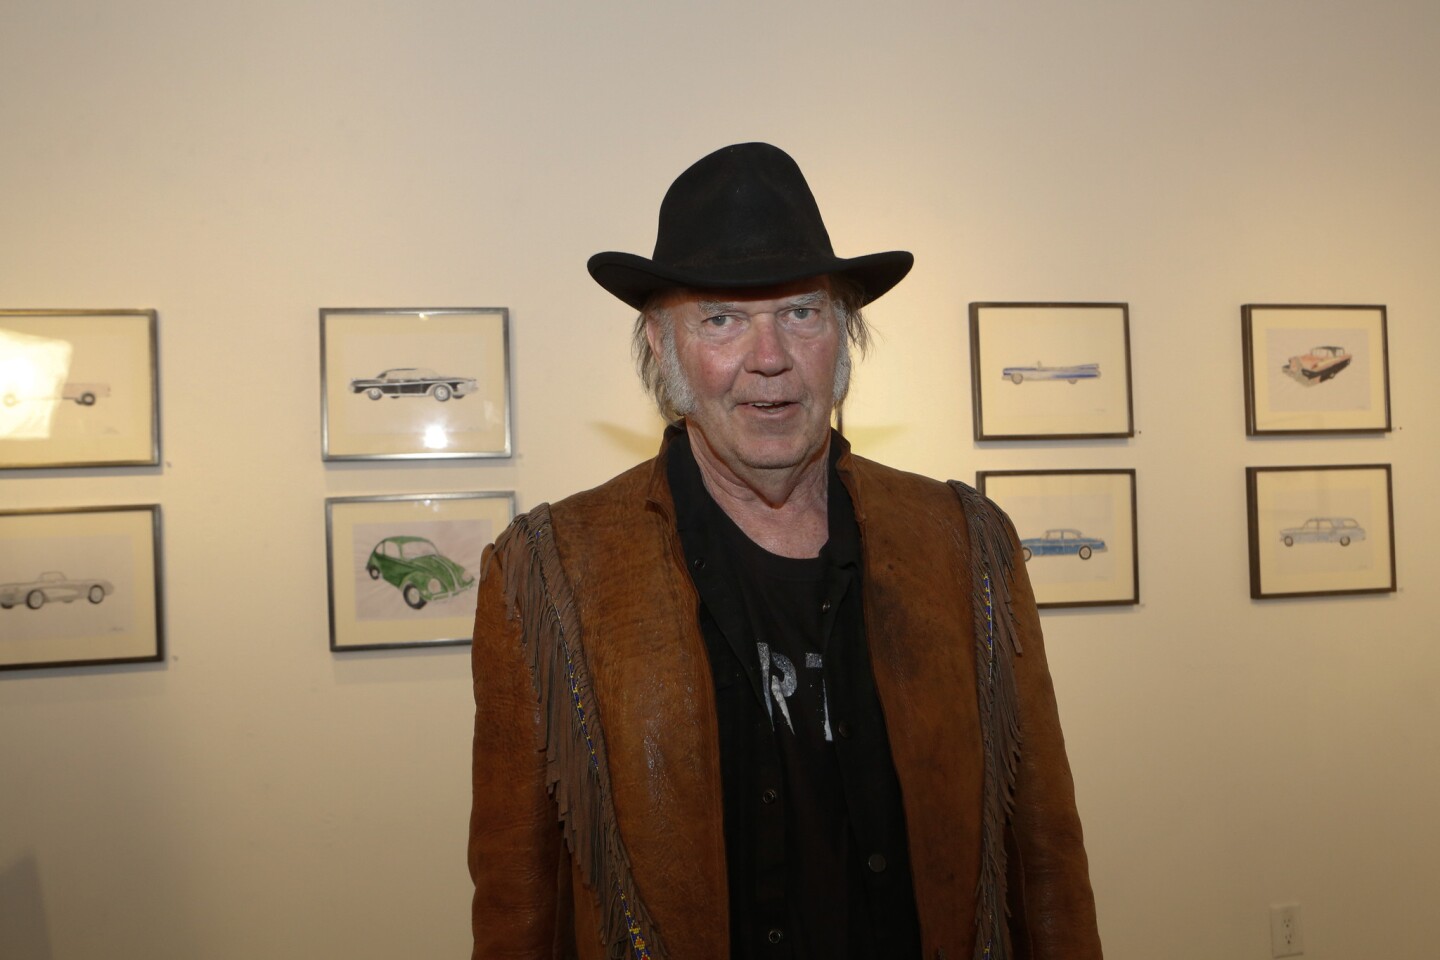 Neil Young with his watercolors and prints of iconic automobiles that he grew up with. His show is at the Robert Berman Gallery, Bergamont Station Arts Center in Santa Monica.